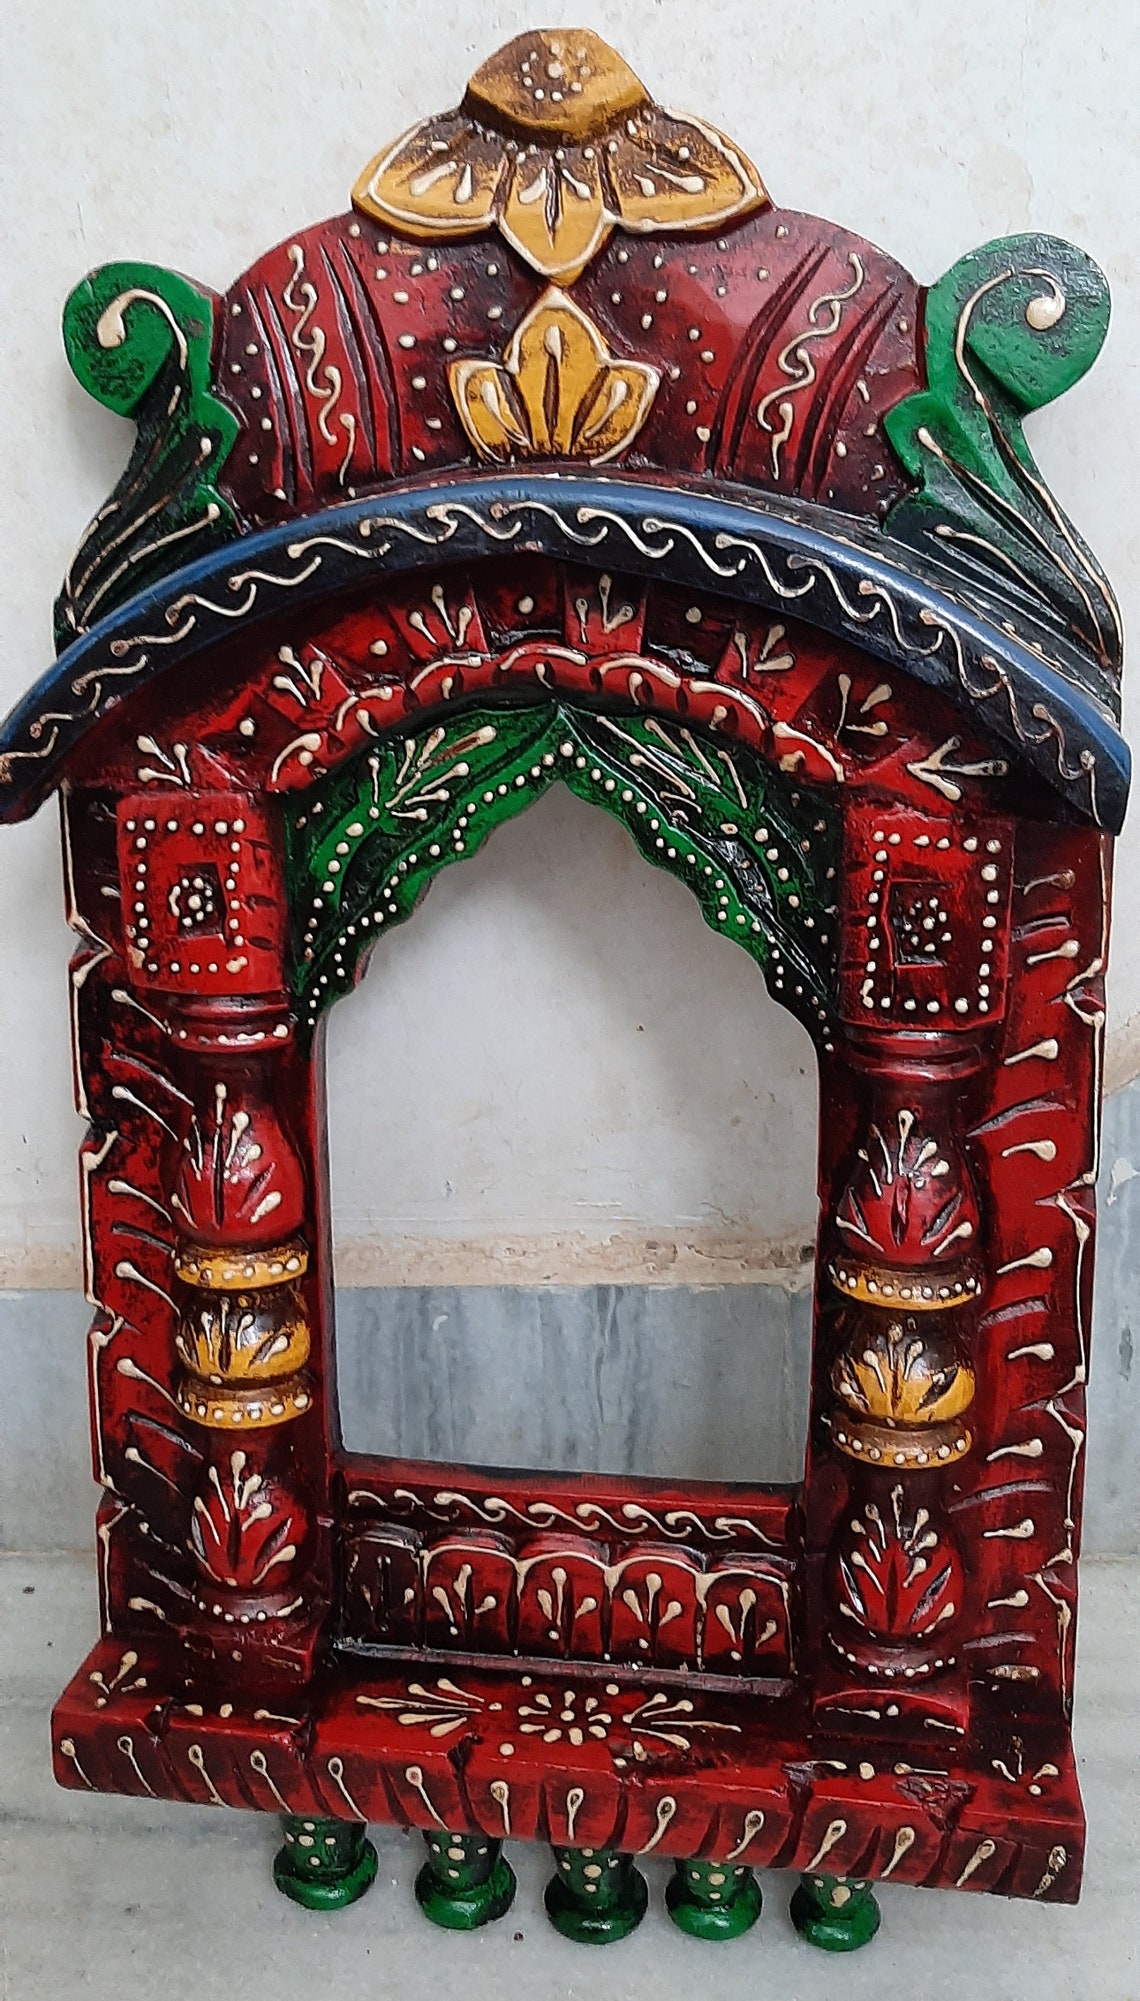 Handmade Wooden Colorful Painted Jharokha/Ethnic Wall Hanging | Etsy